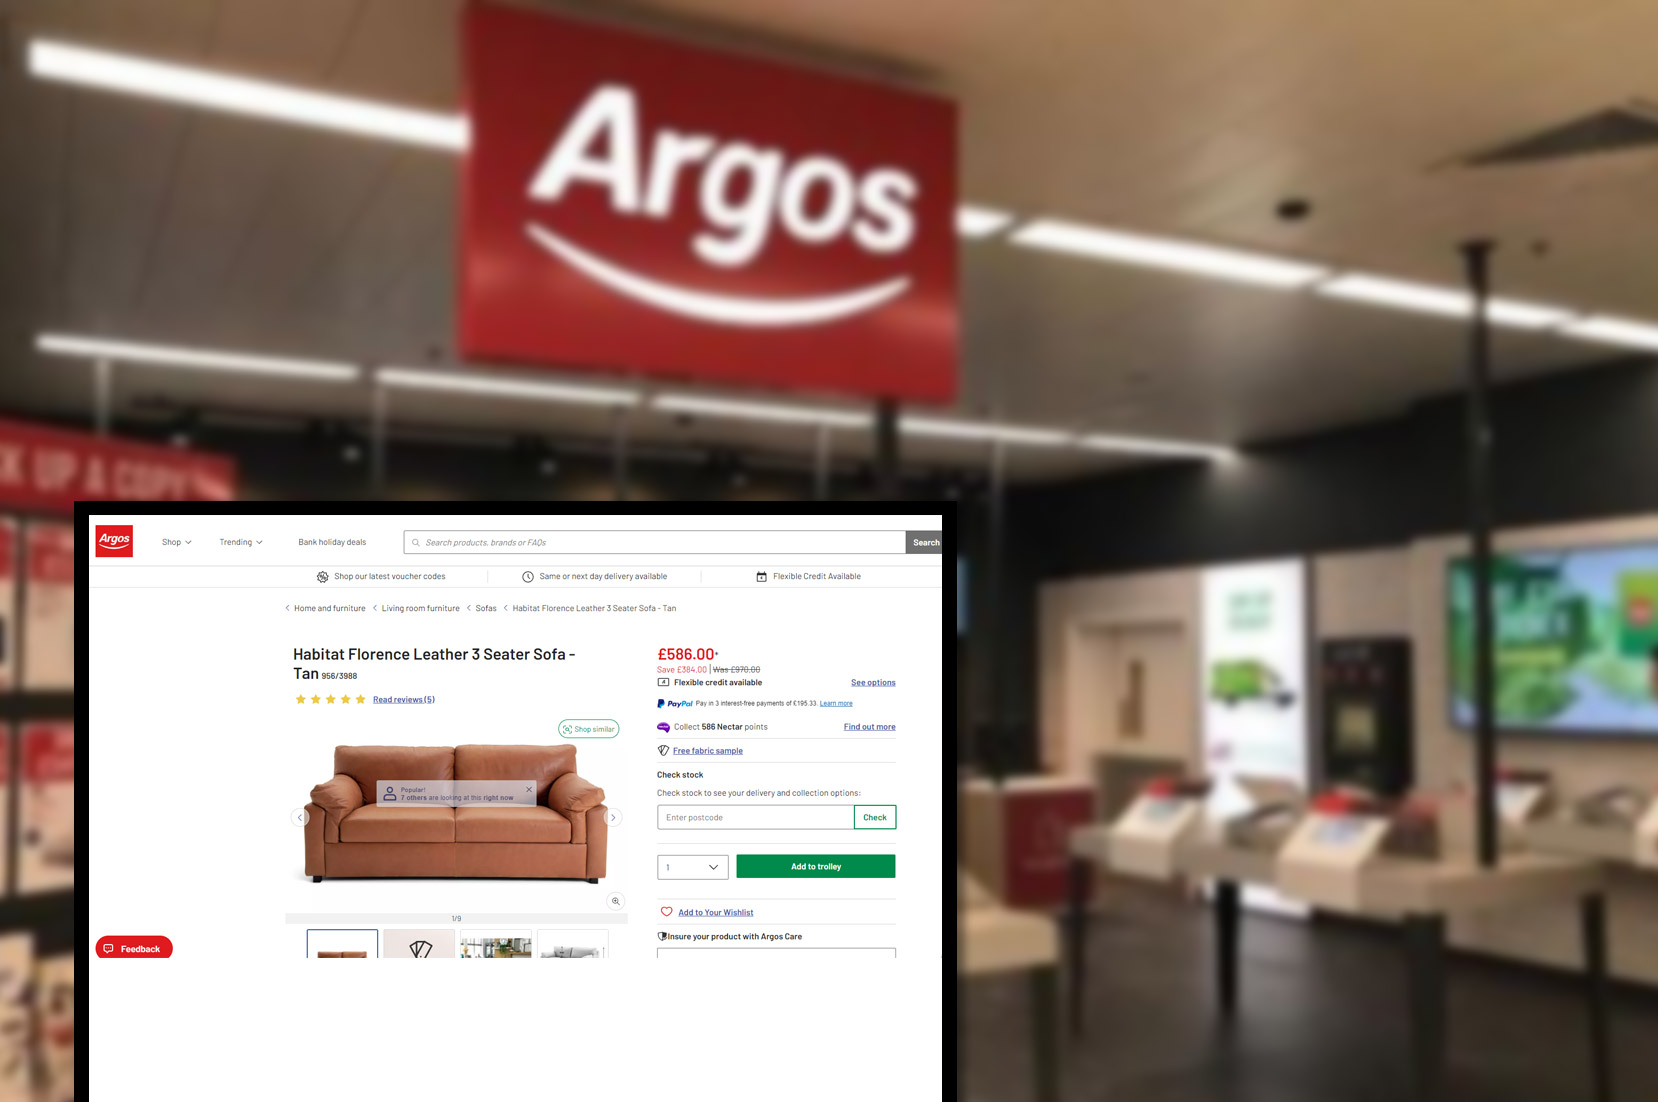 argos-co-ukproduct-pricing-information-and-image-scraping-services